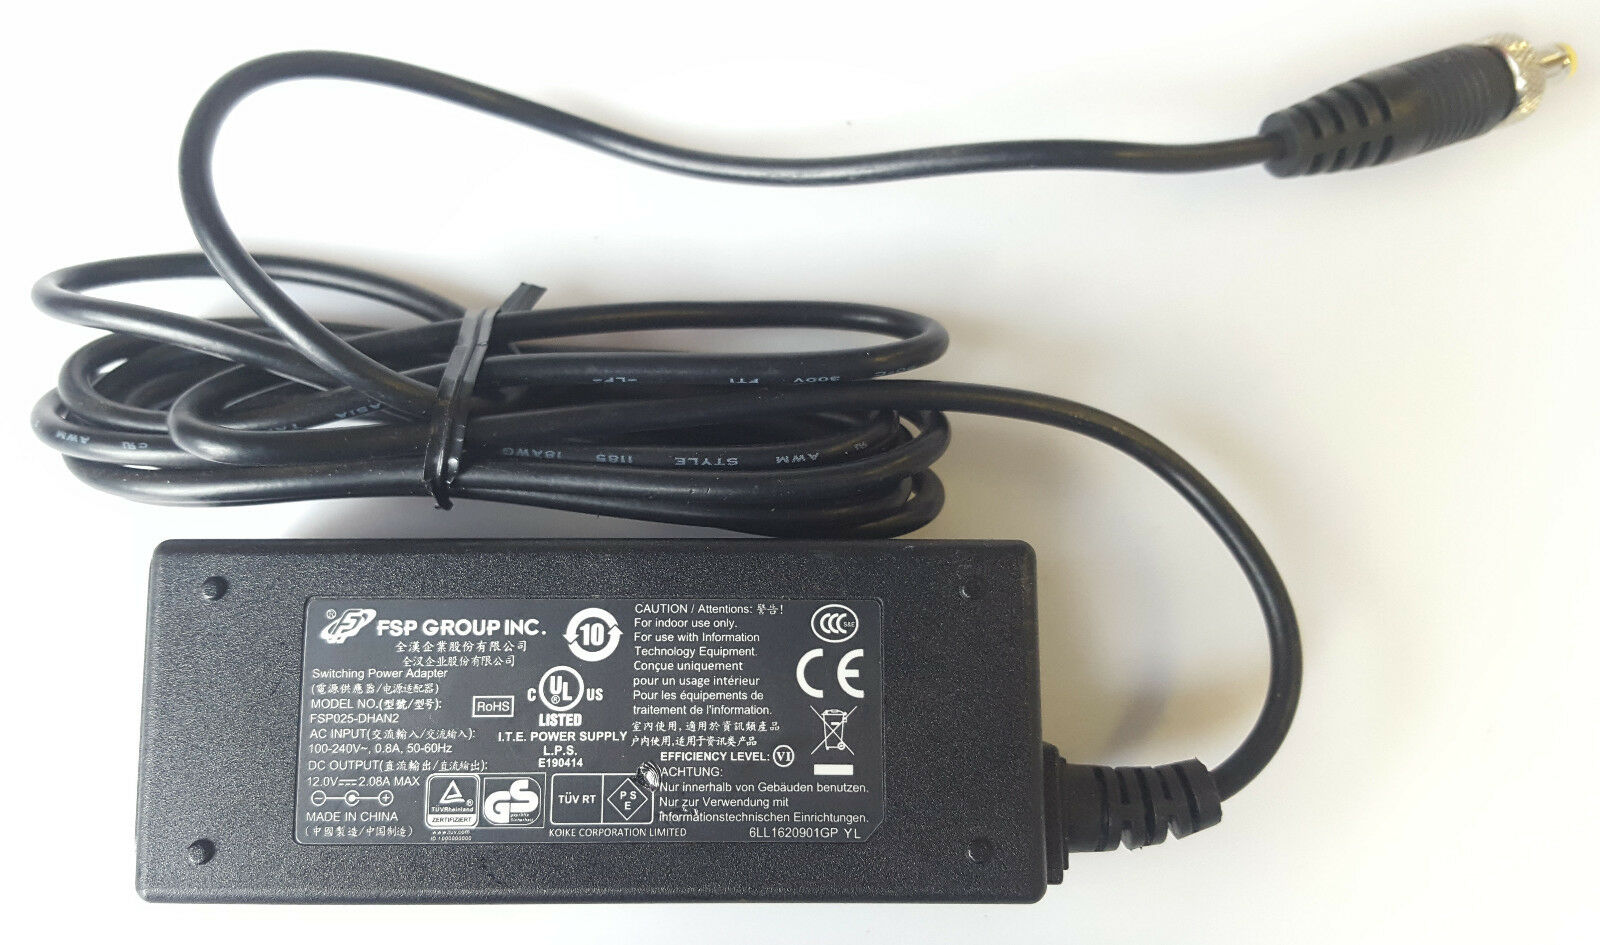 New FSP GROUP INC. FSP025-DHAN2 12V 2.08A AC/DC POWER SUPPLY ADAPTER 9NA0253004